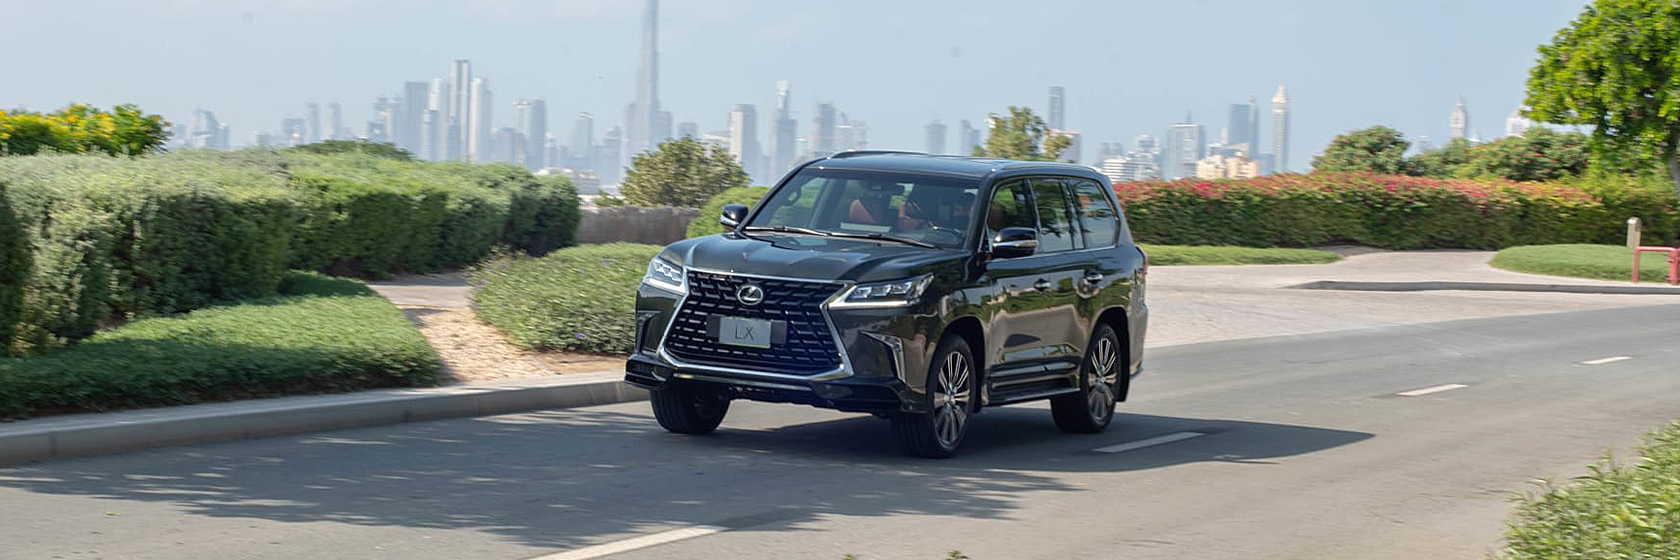 all-you-need-to-know-about-the-new-lexus-lx-2021